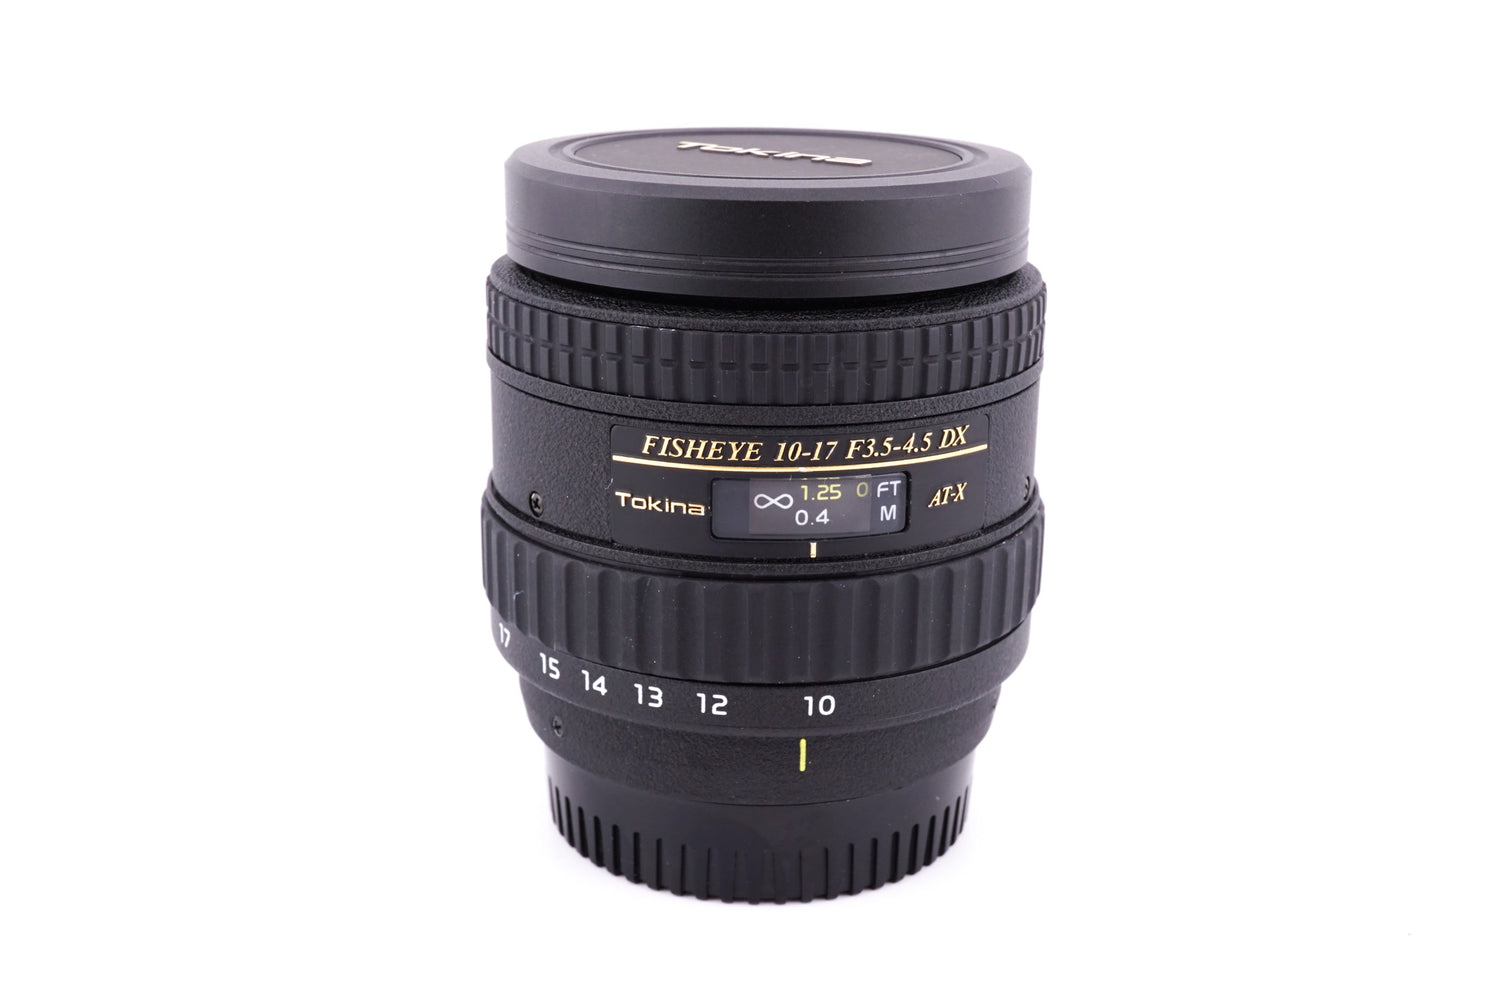 Tokina At-x Fisheye 10-17mm F3.5-4.5 | paymentsway.co